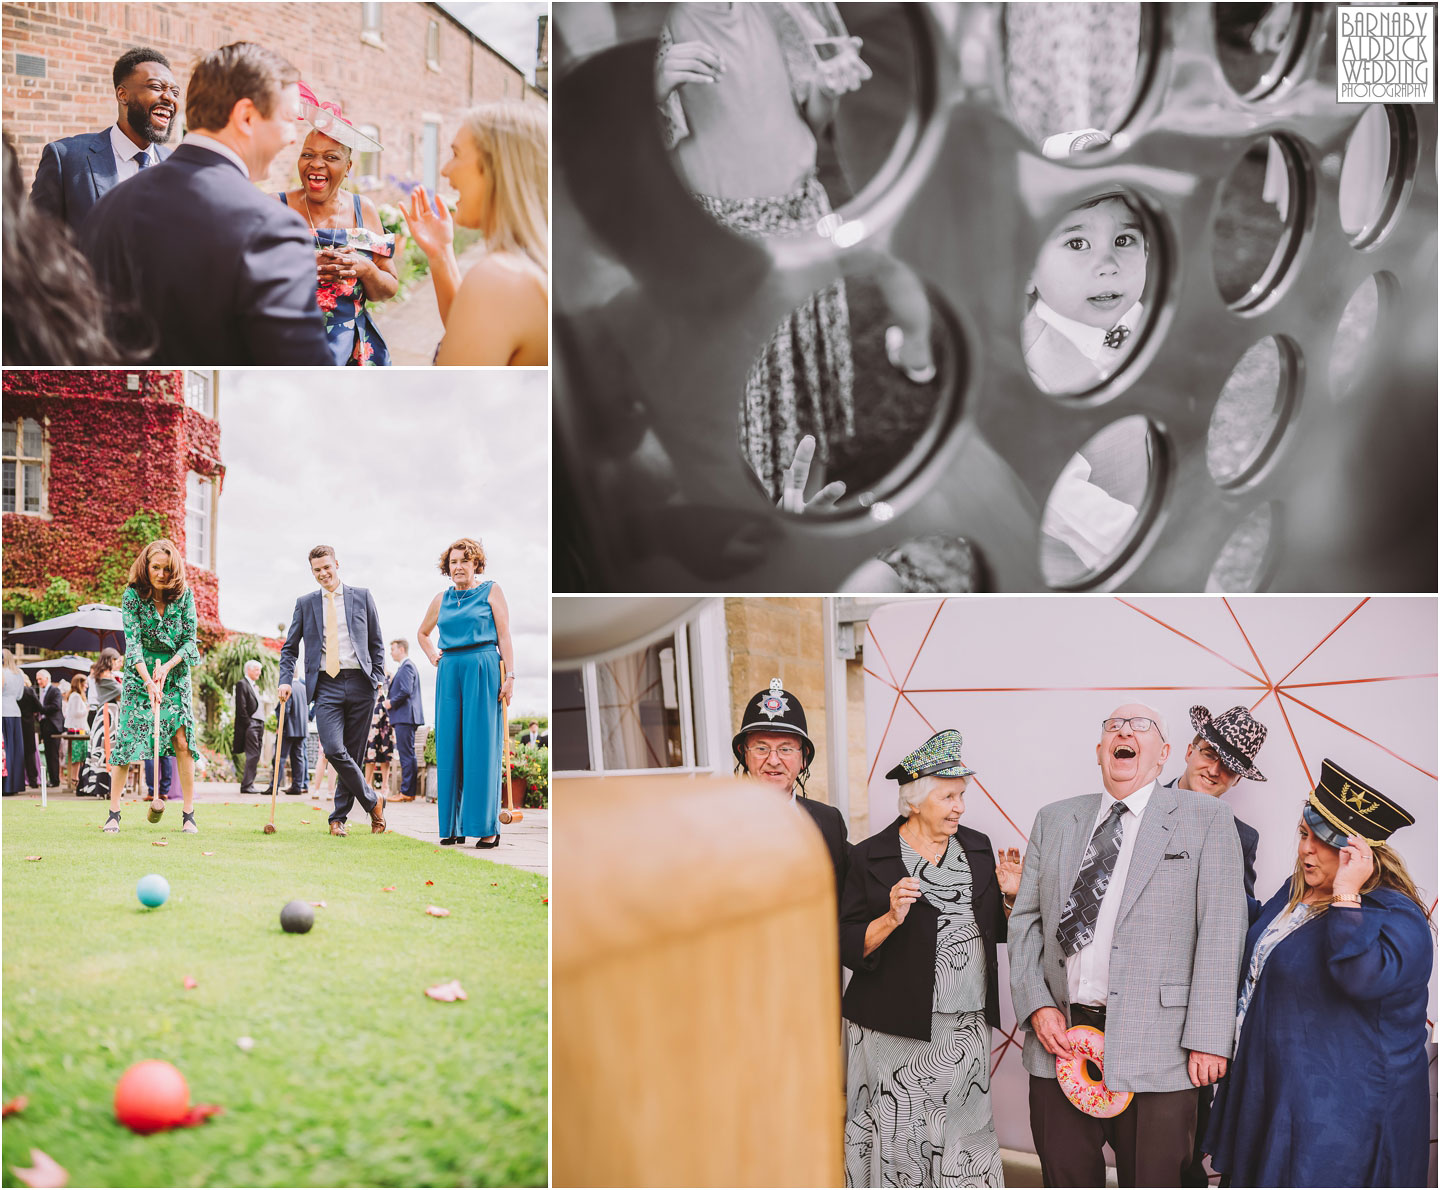 Relaxed Wedding photos by Yorkshire photographer Barnaby Aldrick